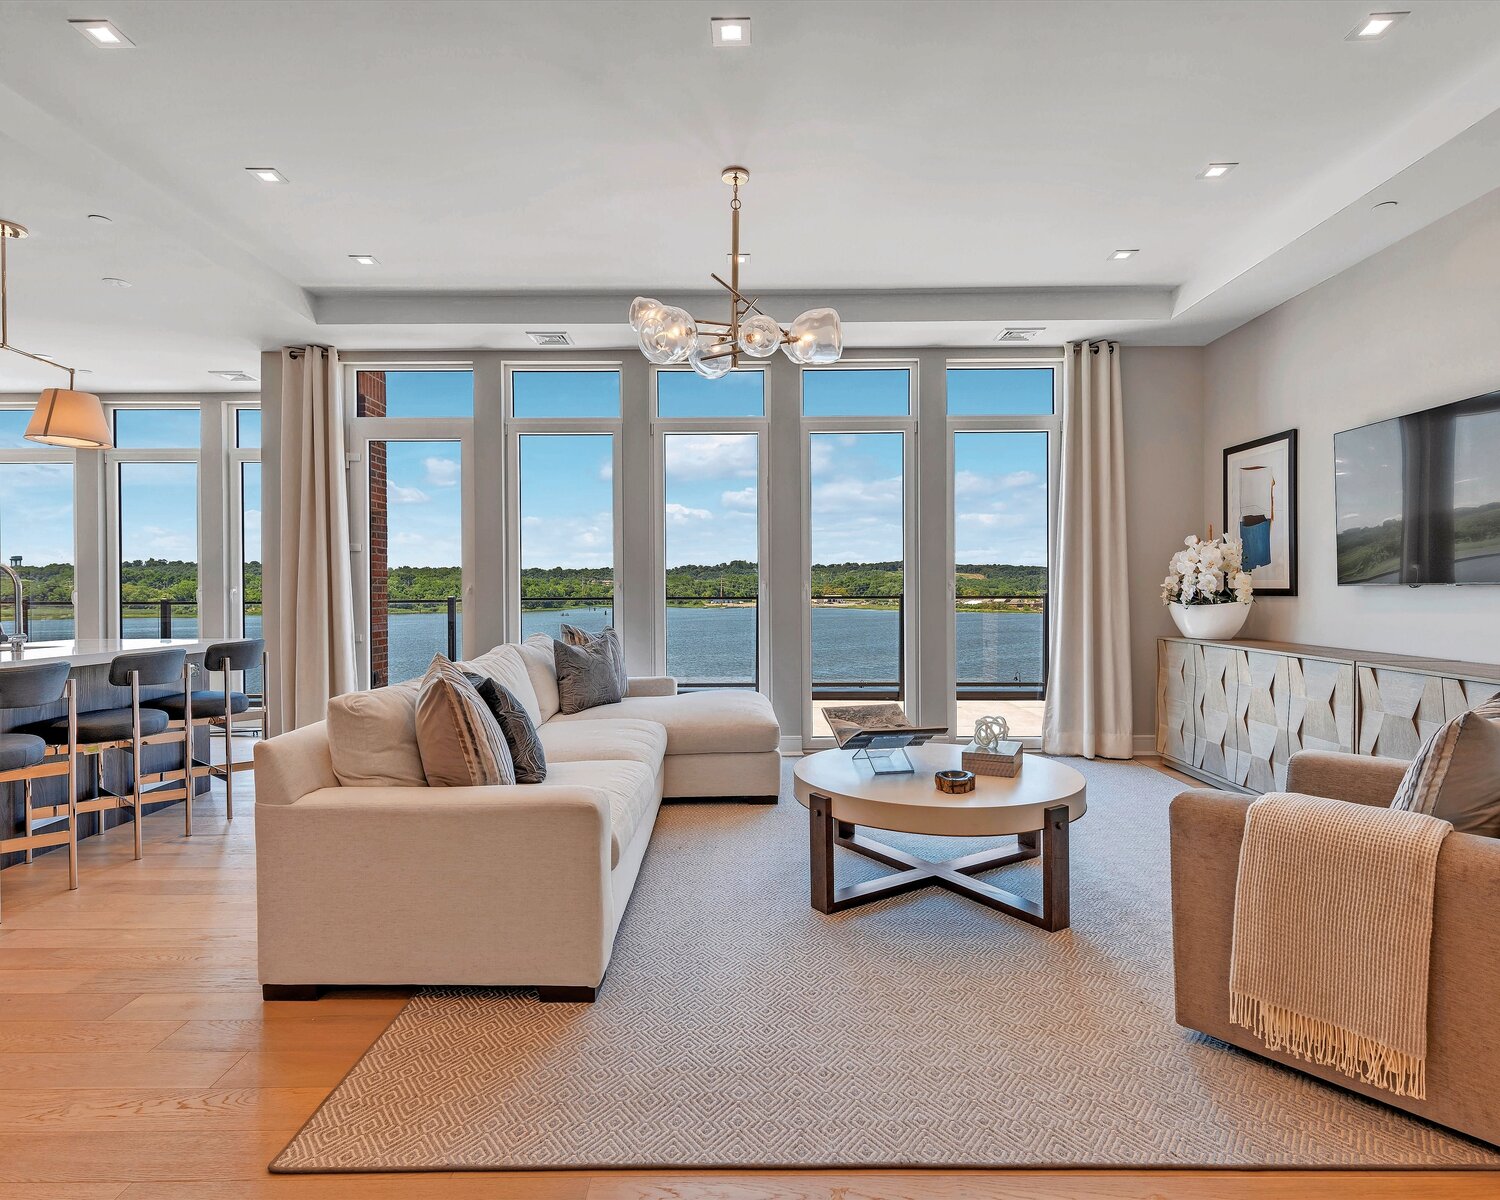 Each condominium at The Residences has a direct view of Hempstead Harbor.